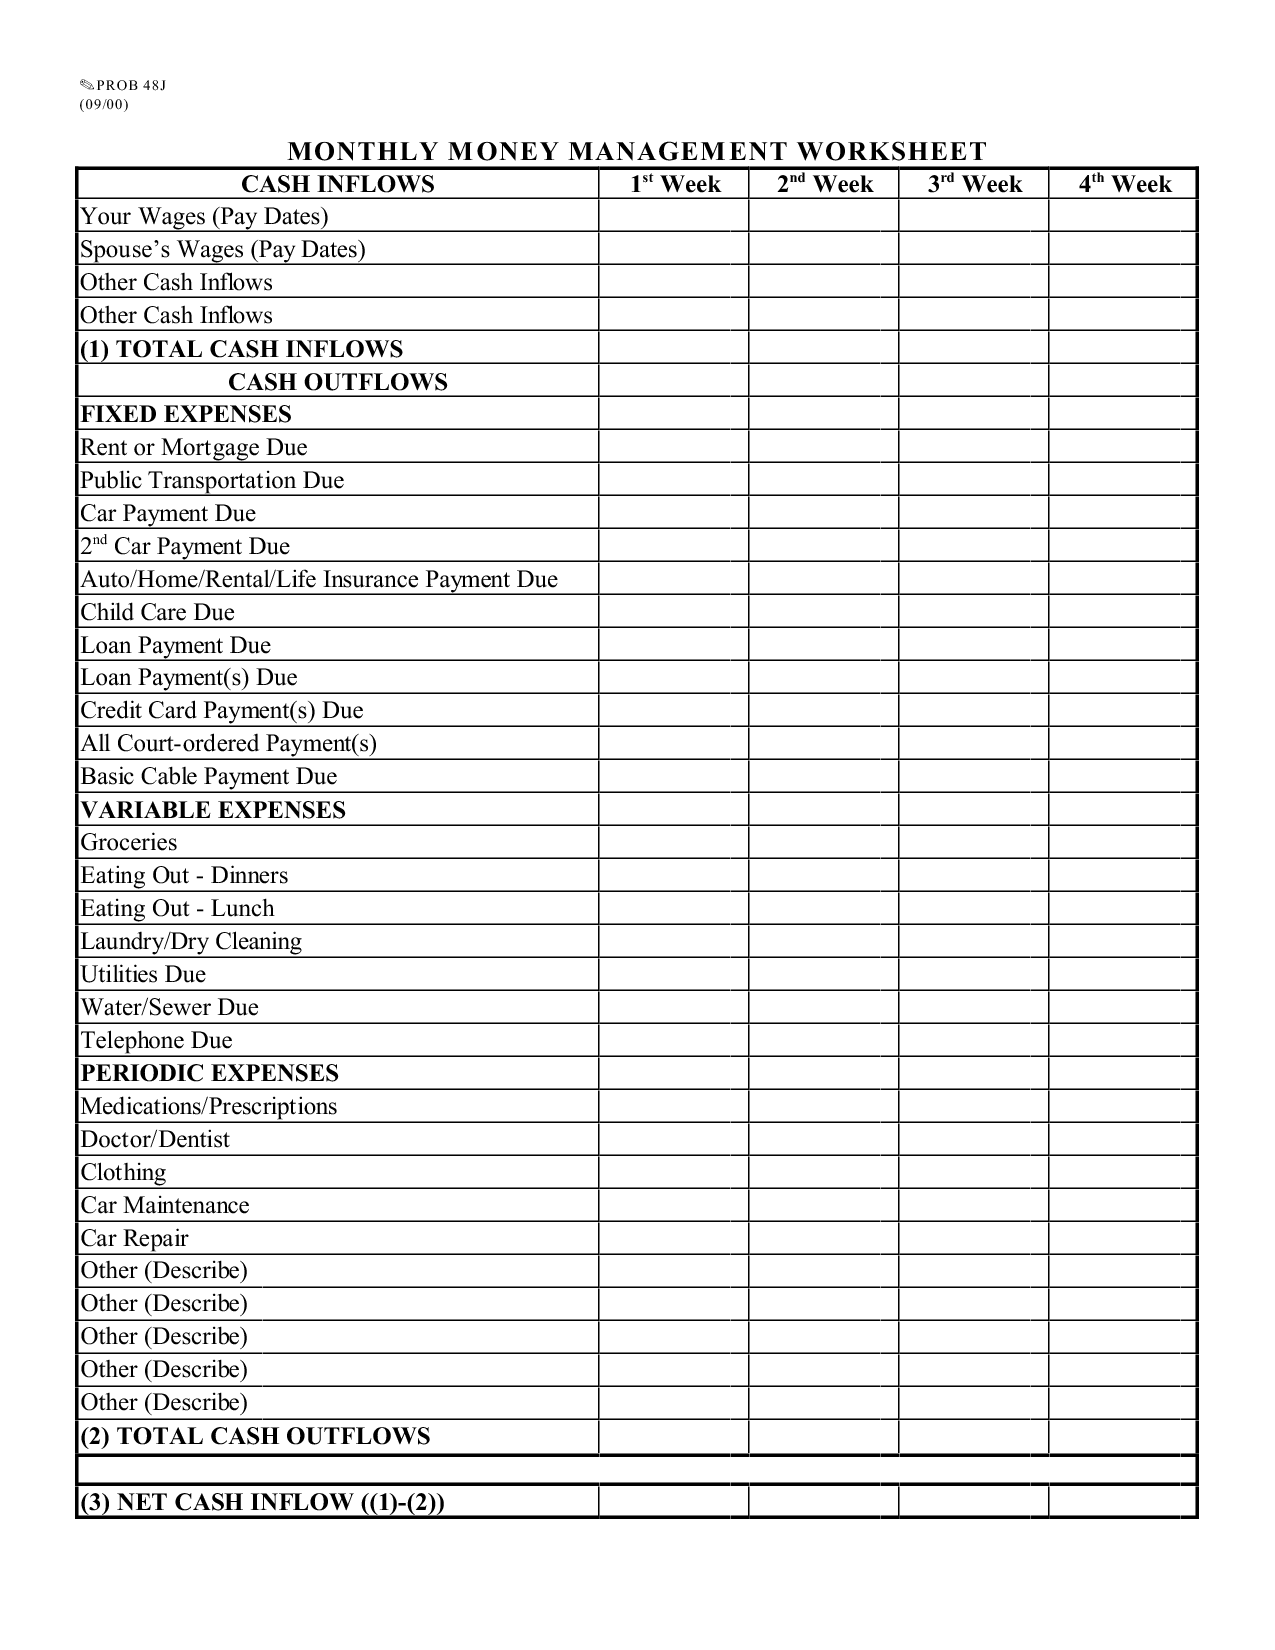 16-best-images-of-budget-worksheet-monthly-bill-blank-monthly-budget